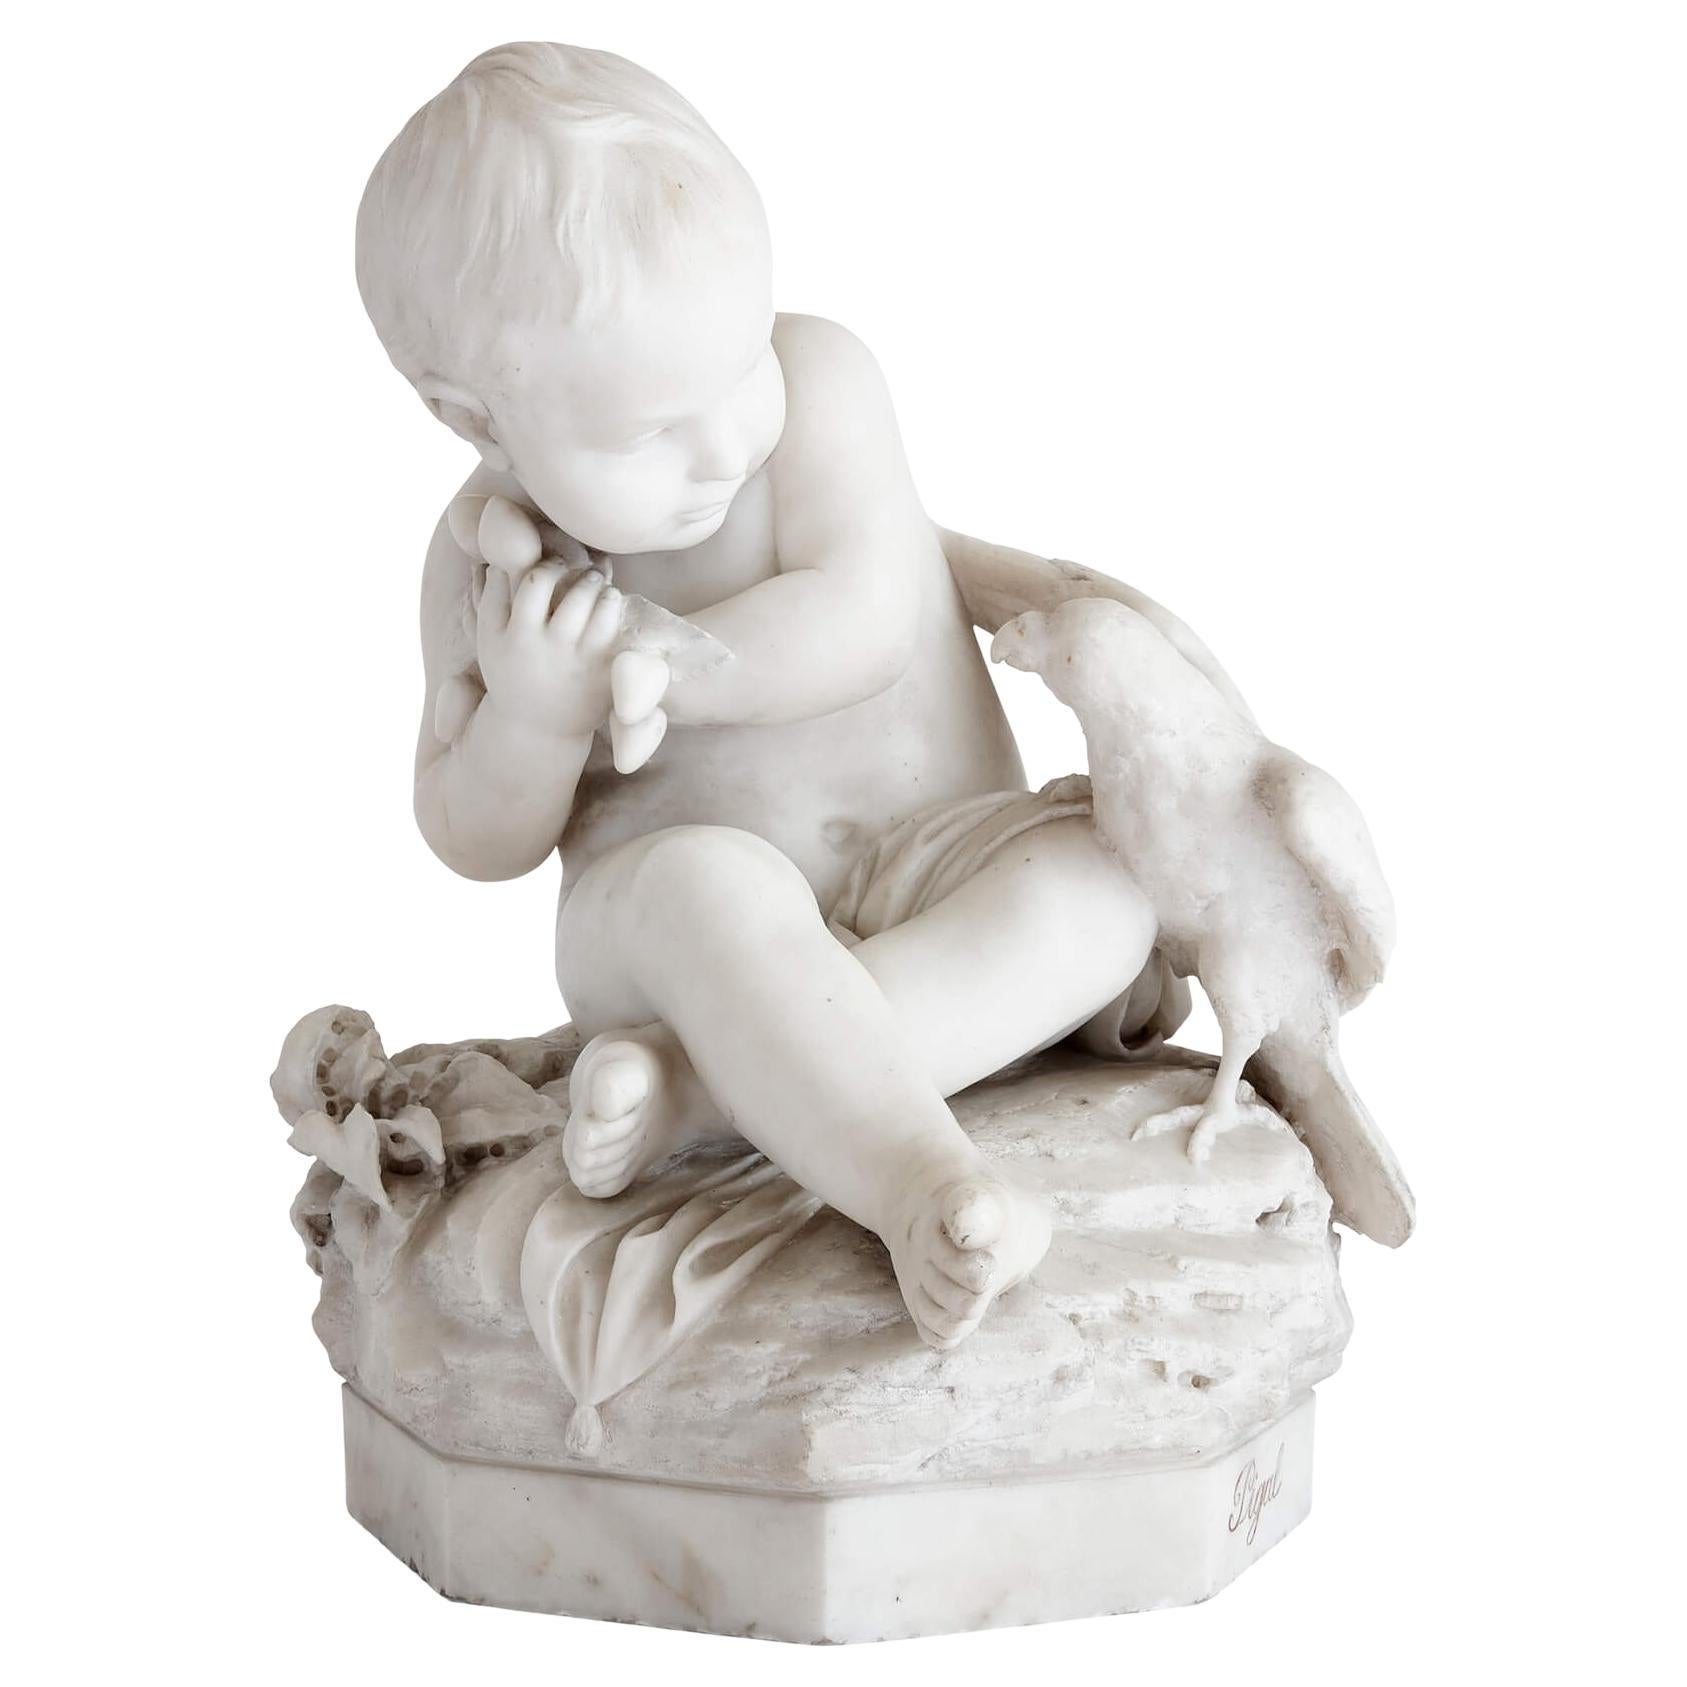 19th Century Marble Sculpture of a Putto and Bird, Signed 'Pigal'